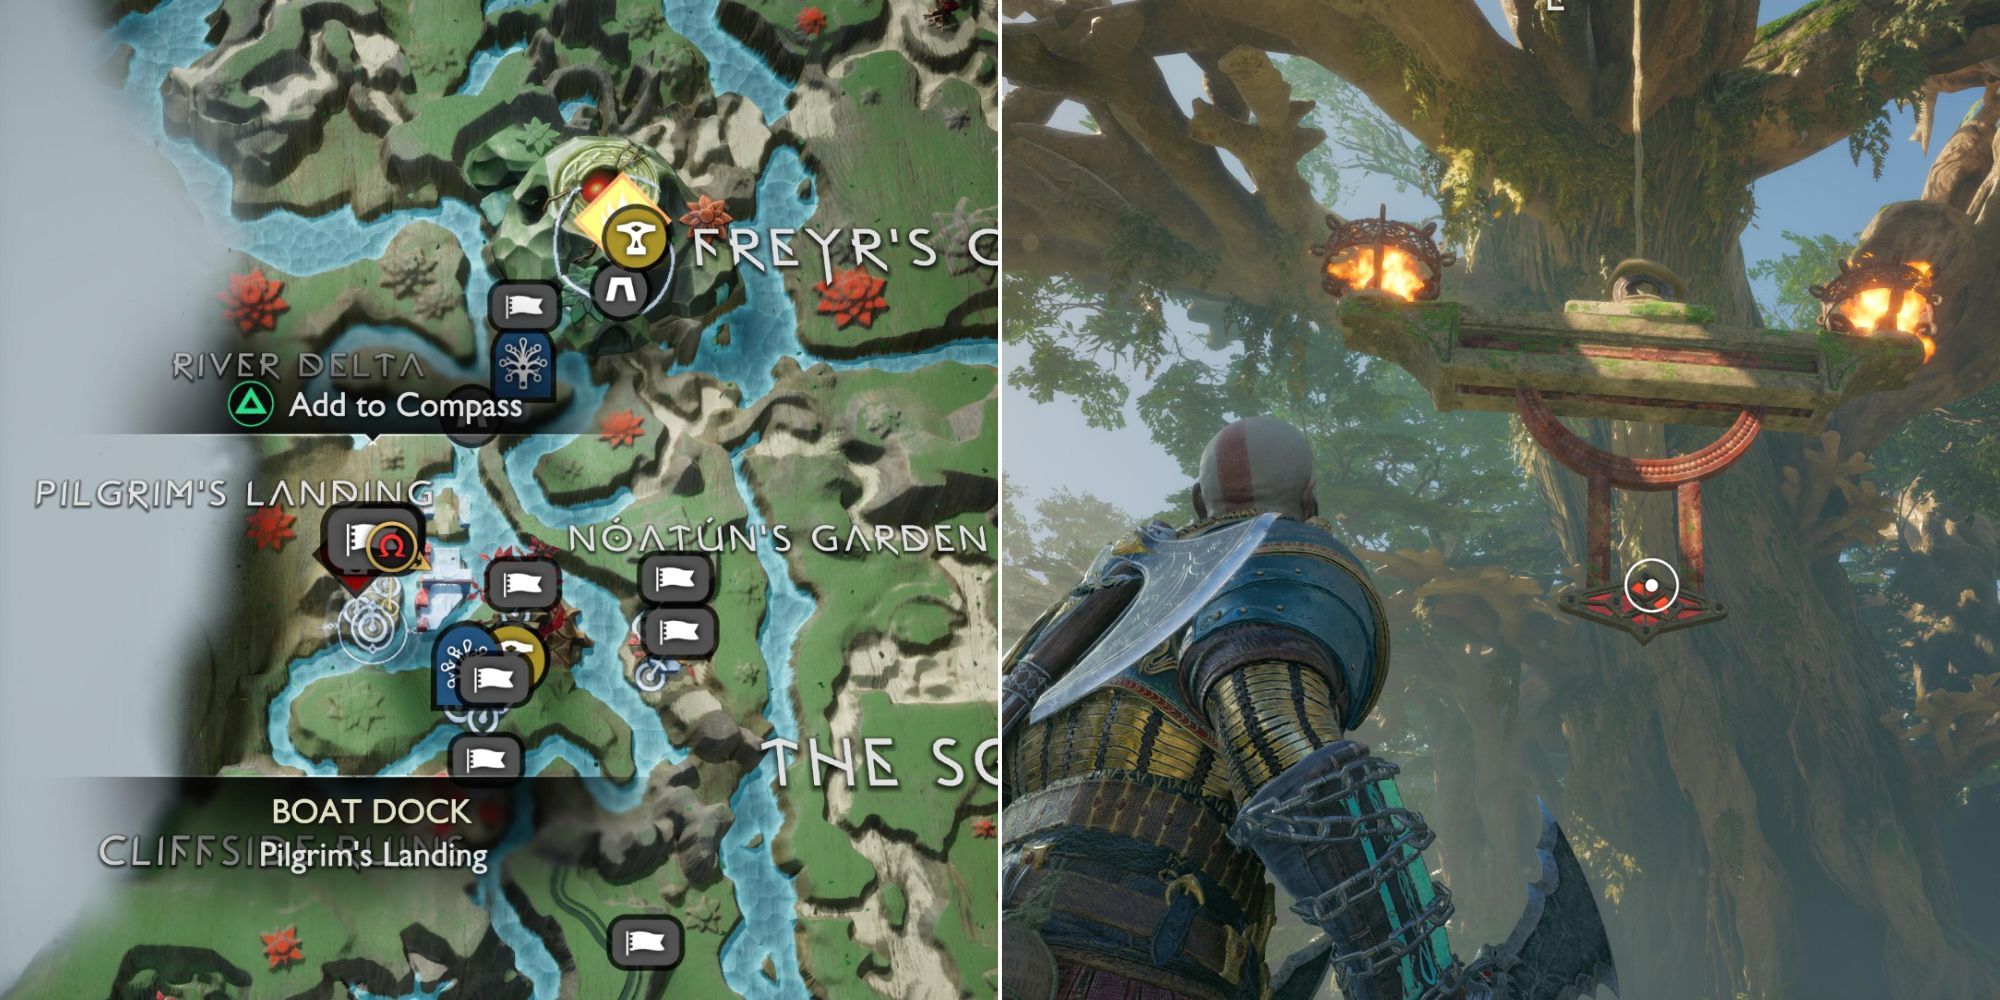 Two photos. The left is the Vanaheim map showing the location of Pilgrim's landing. The right photo is Kratos looking up at a solved brazier puzzle. The two braziers are alight, and are hanging from a tree.